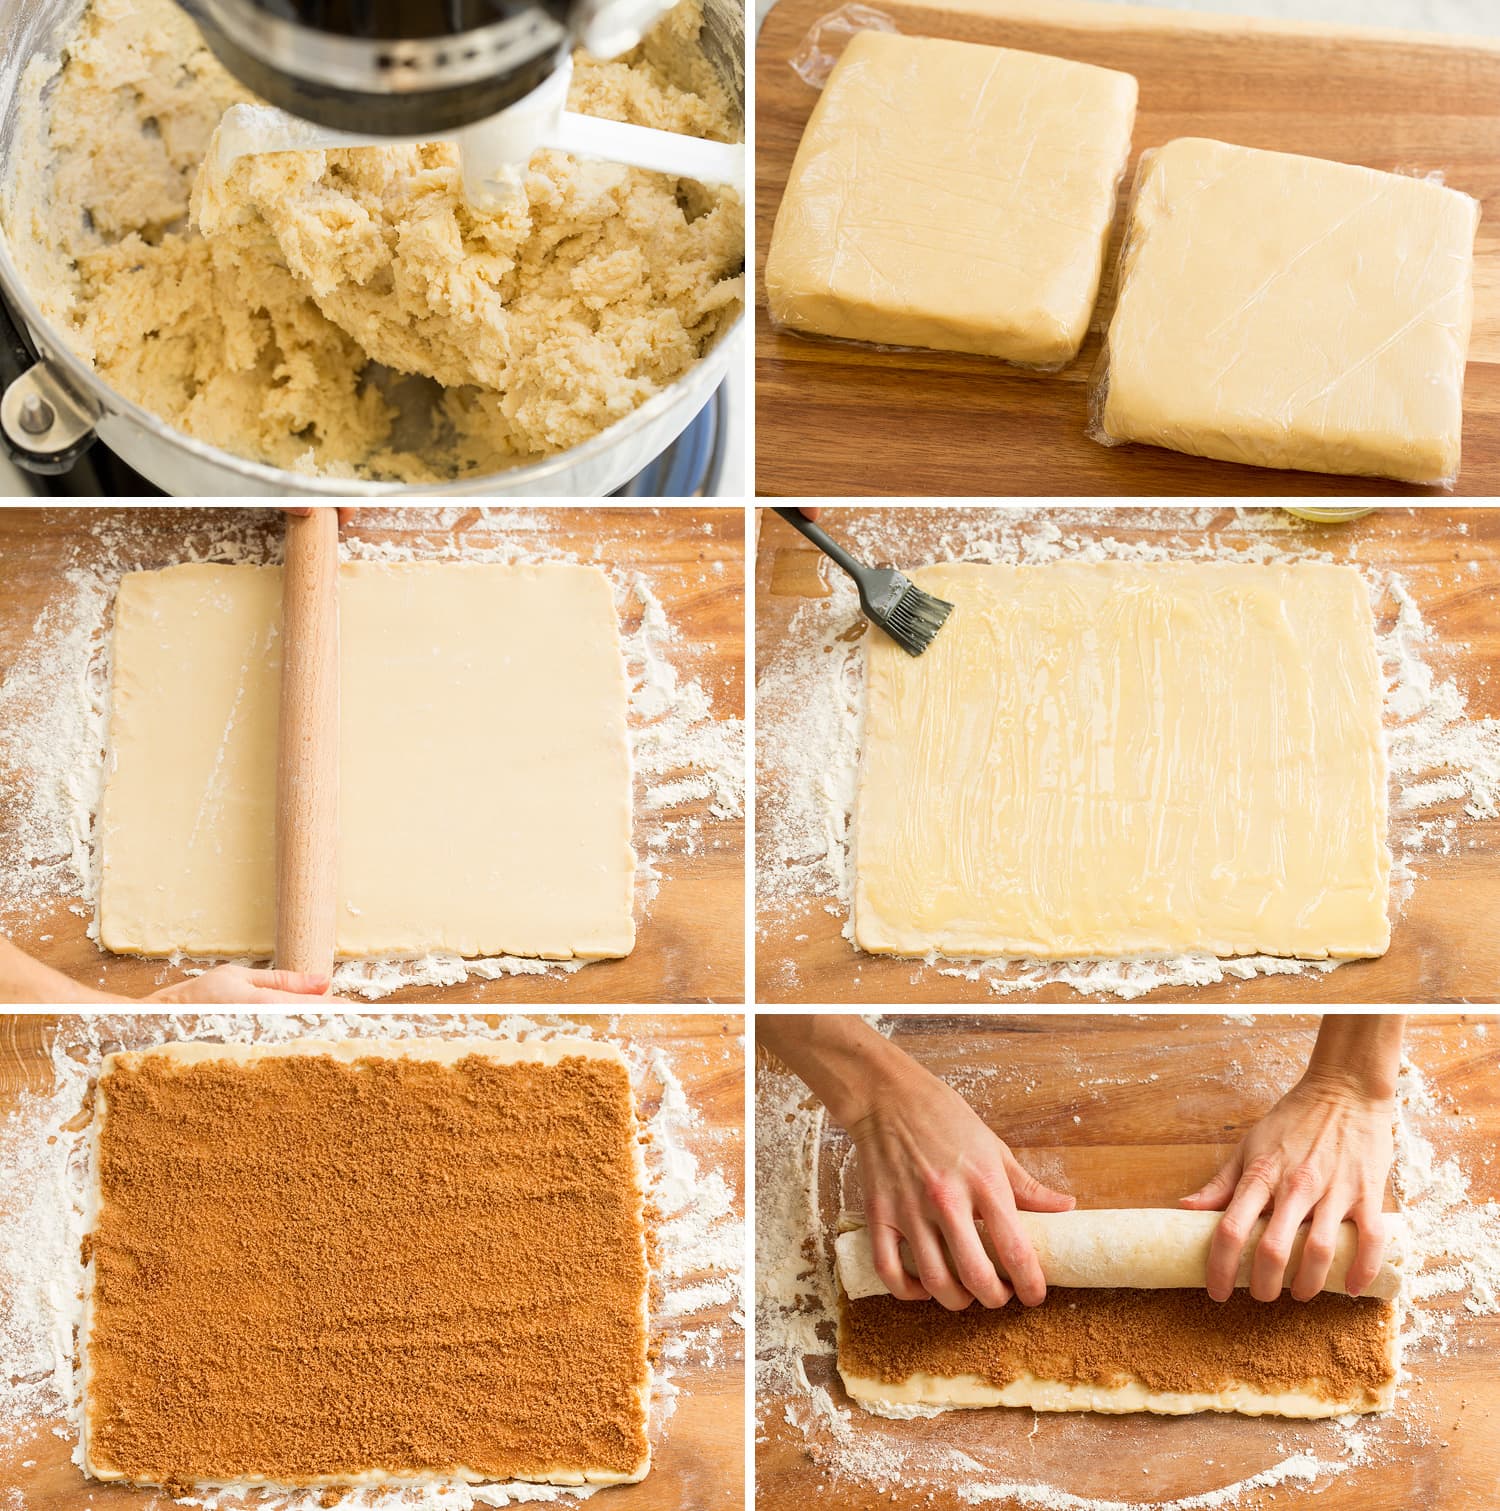 Steps of shaping dough with cinnamon sugar.